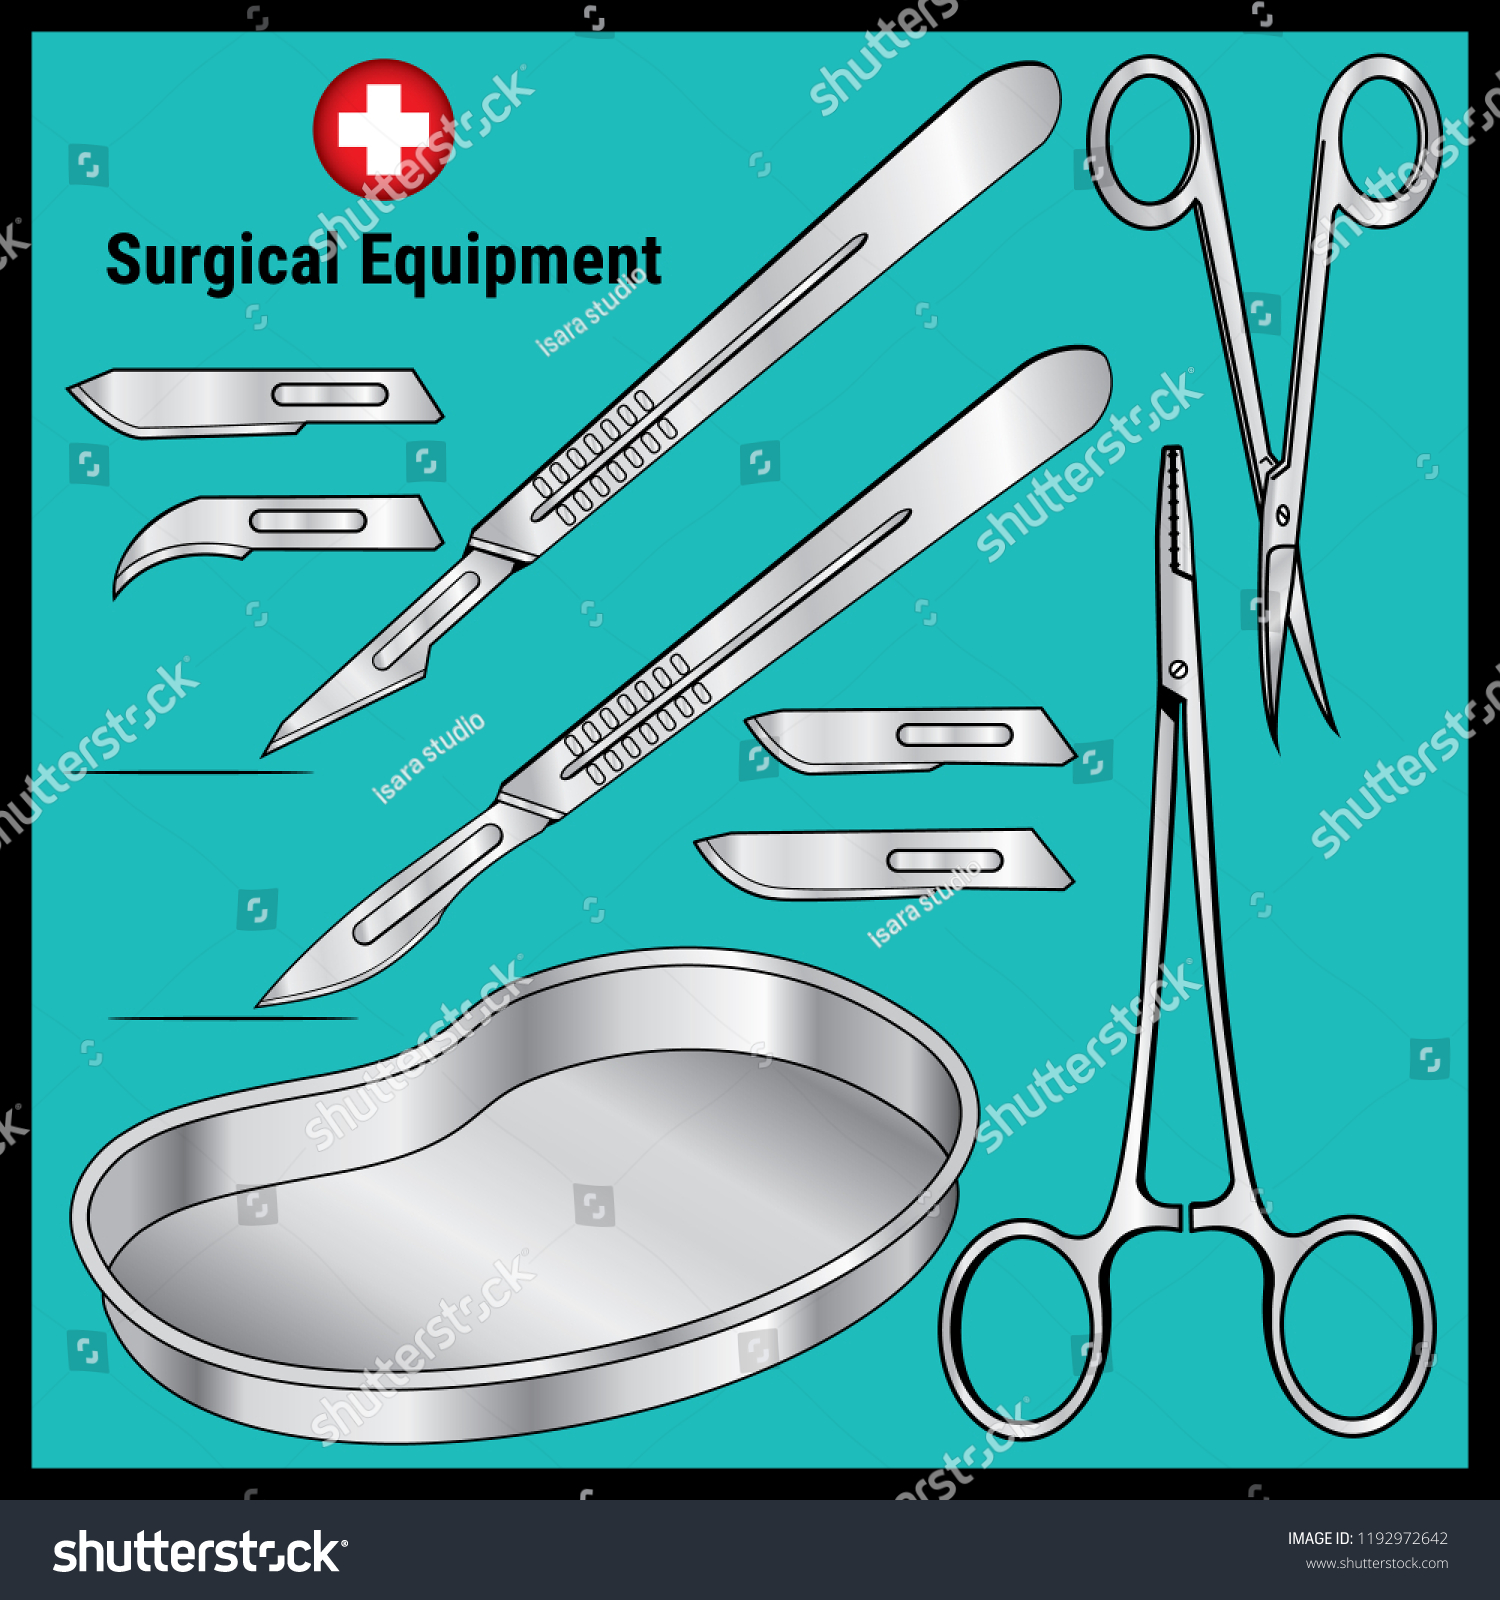 7,792 Doctor tray Images, Stock Photos & Vectors | Shutterstock